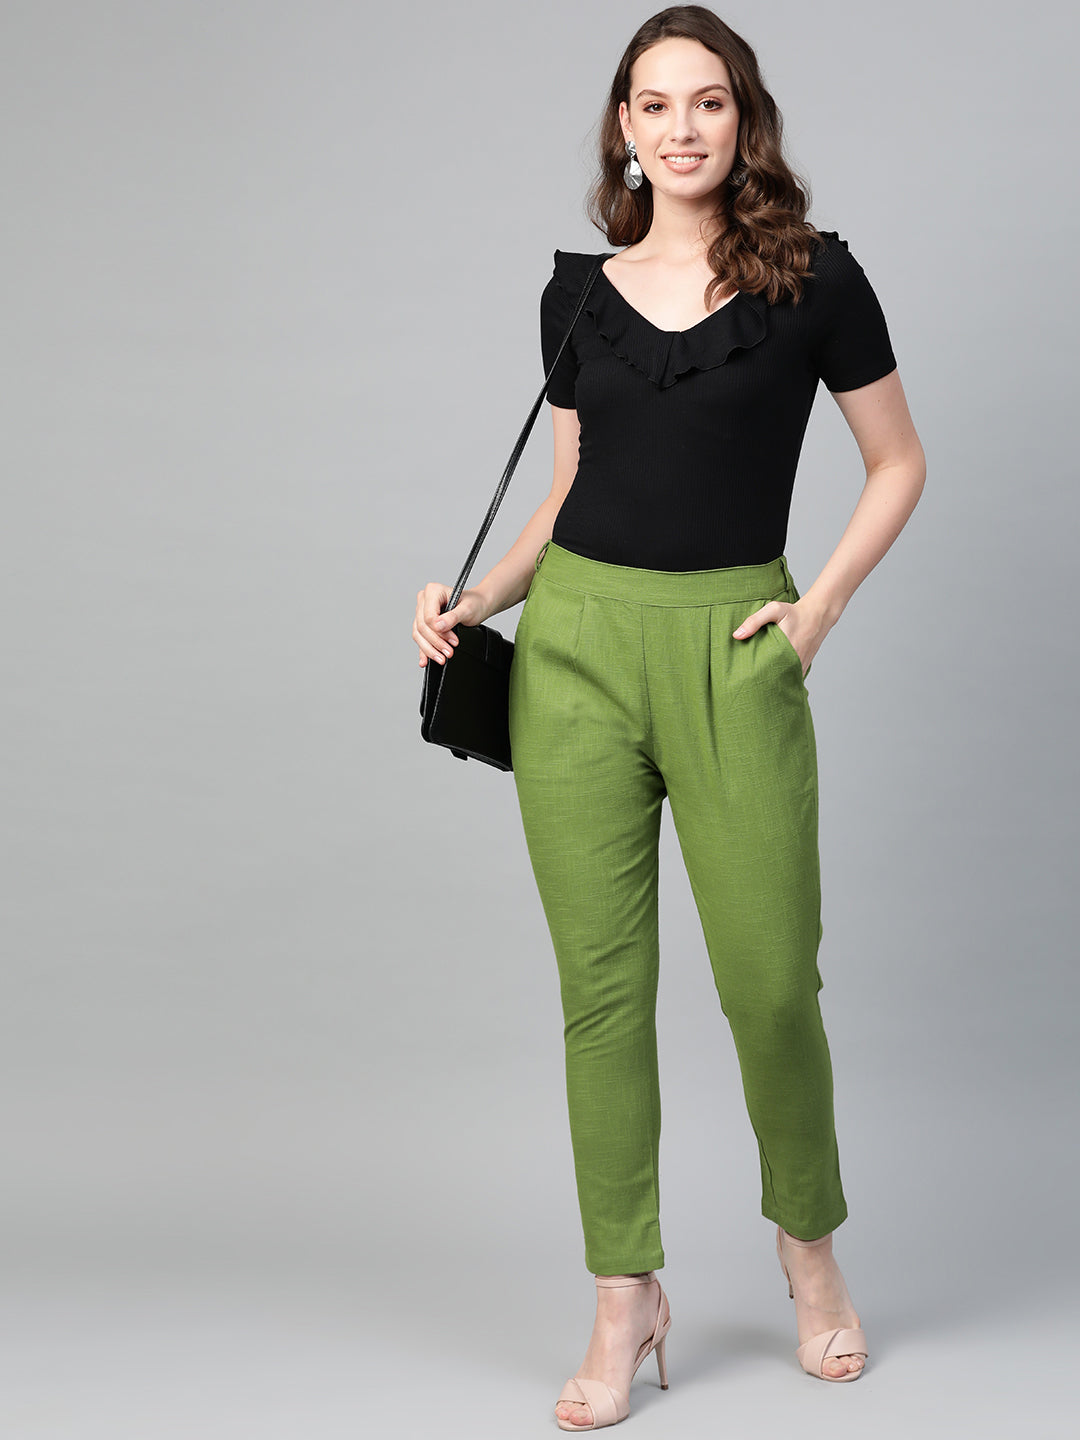 REGULAR FIT TROUSERS PATTERN– The Assembly Line shop